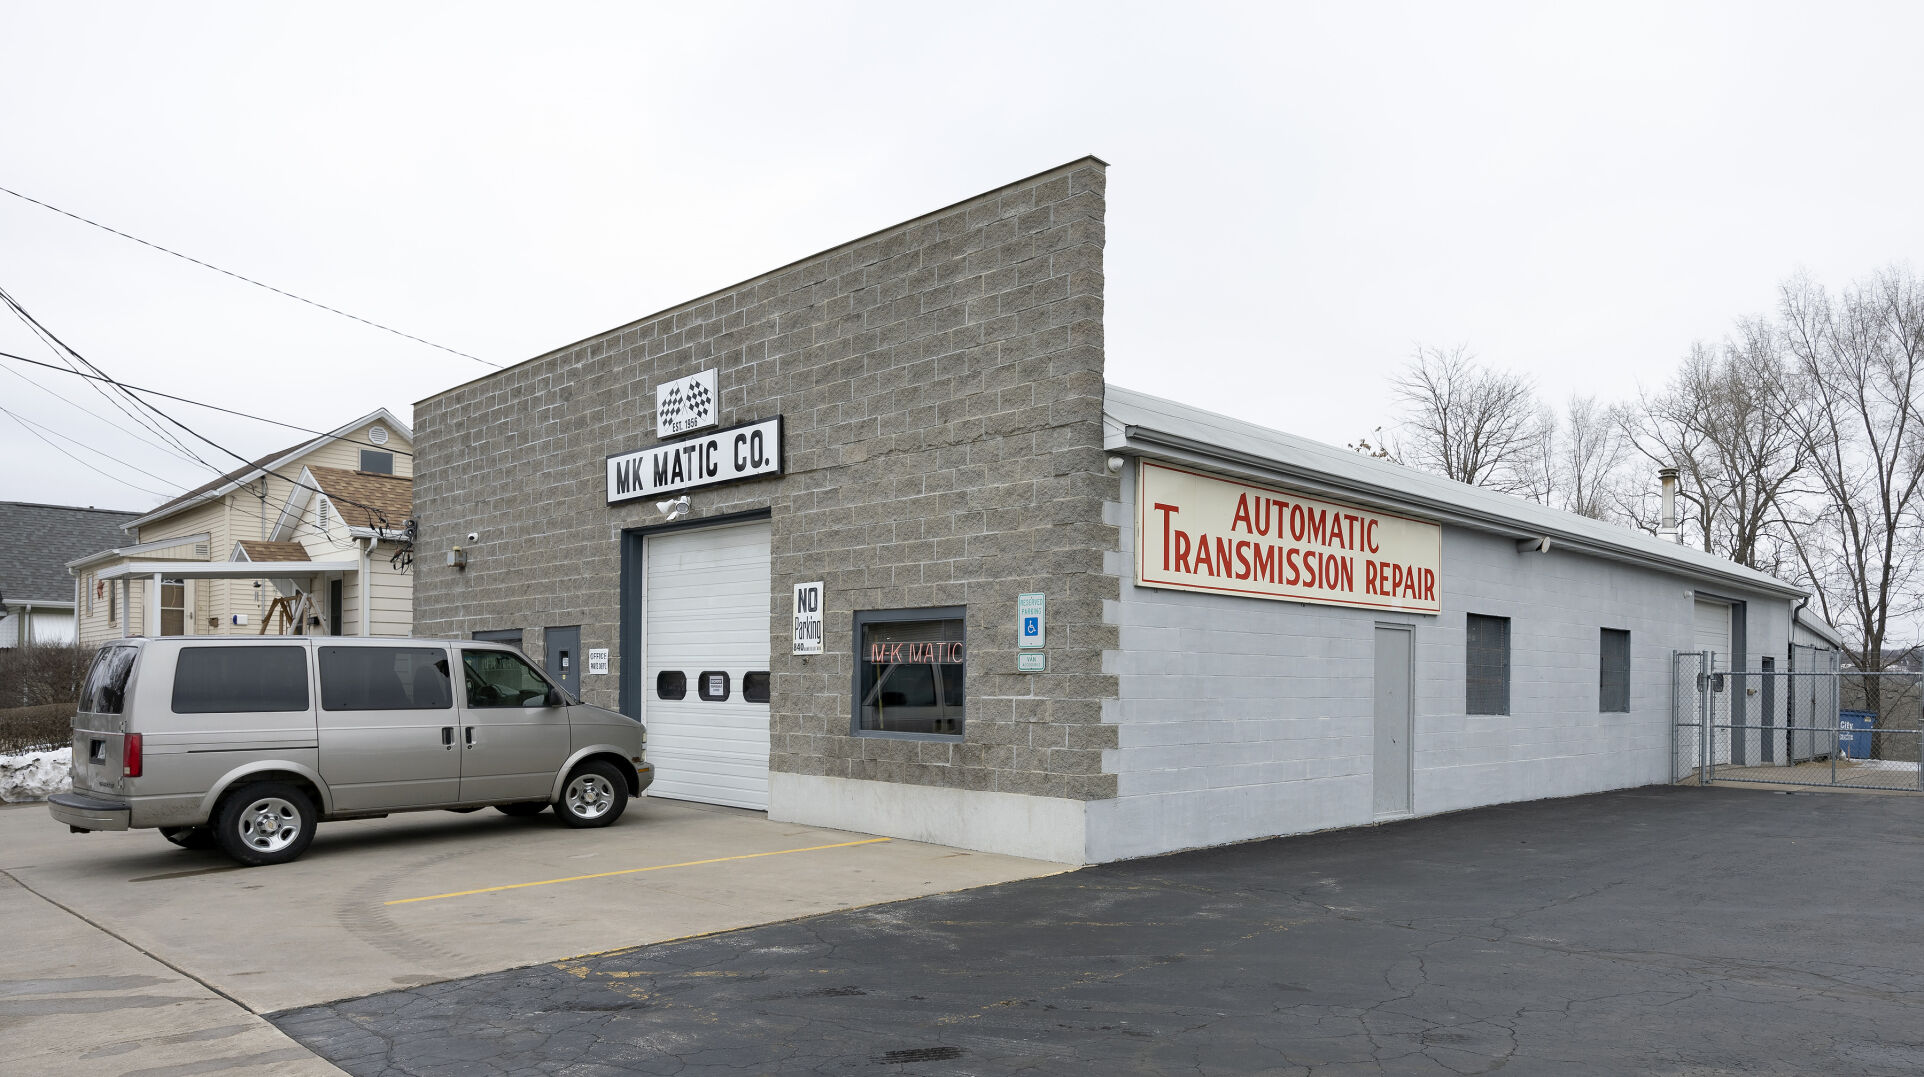 M-K Matic Transmission Co. on Garfield Avenue in Dubuque on Wednesday, Feb. 15, 2023.    PHOTO CREDIT: Gassman